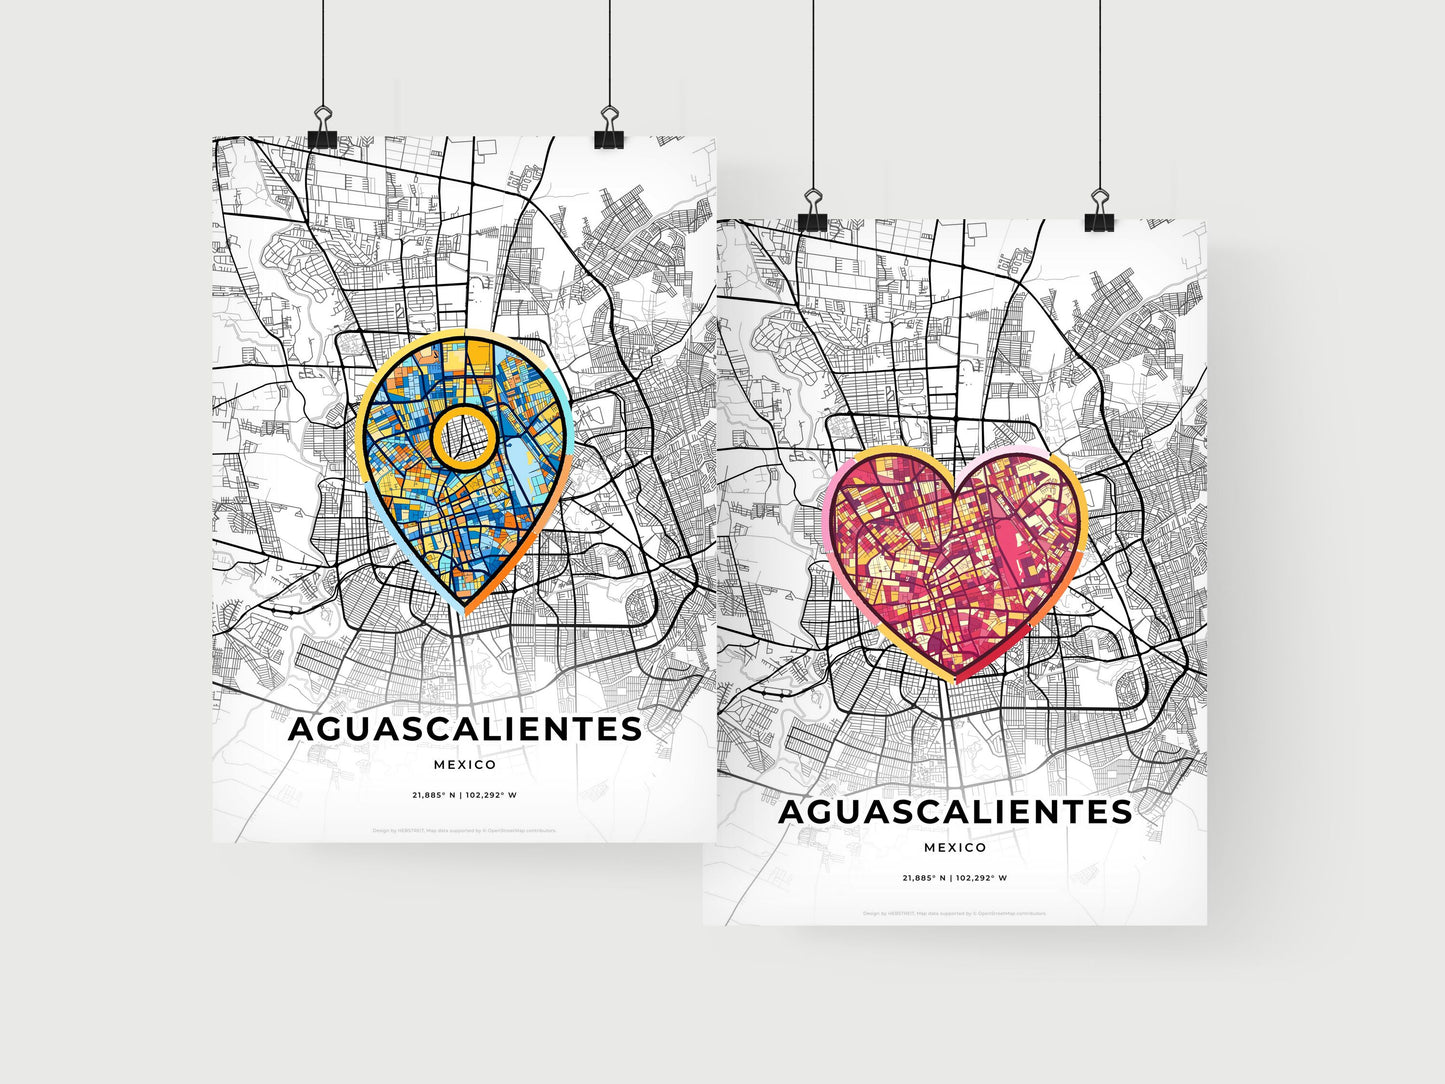 AGUASCALIENTES MEXICO minimal art map with a colorful icon. Where it all began, Couple map gift.